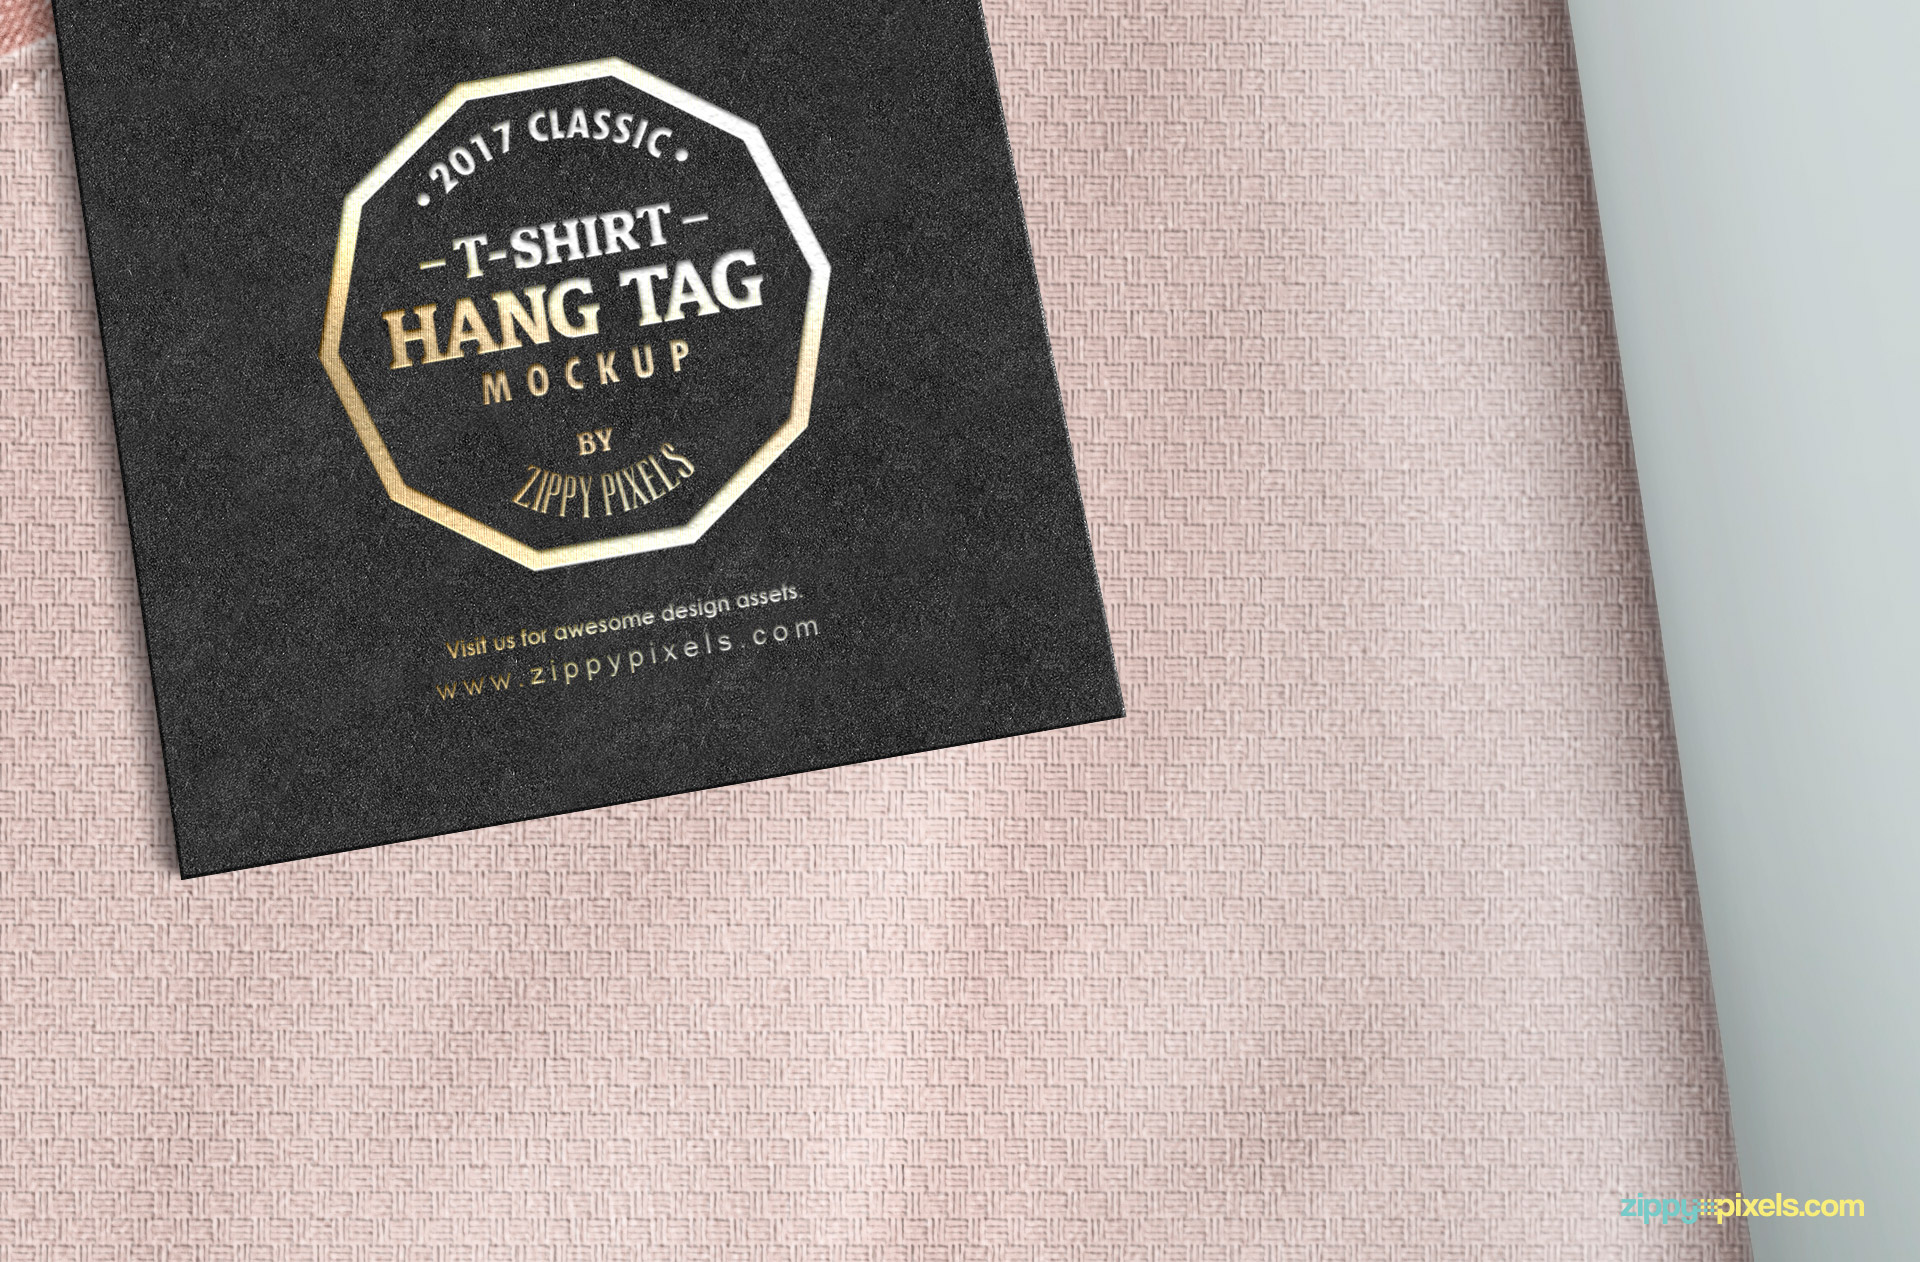 Paper label tag mockup psd to present your own designs.